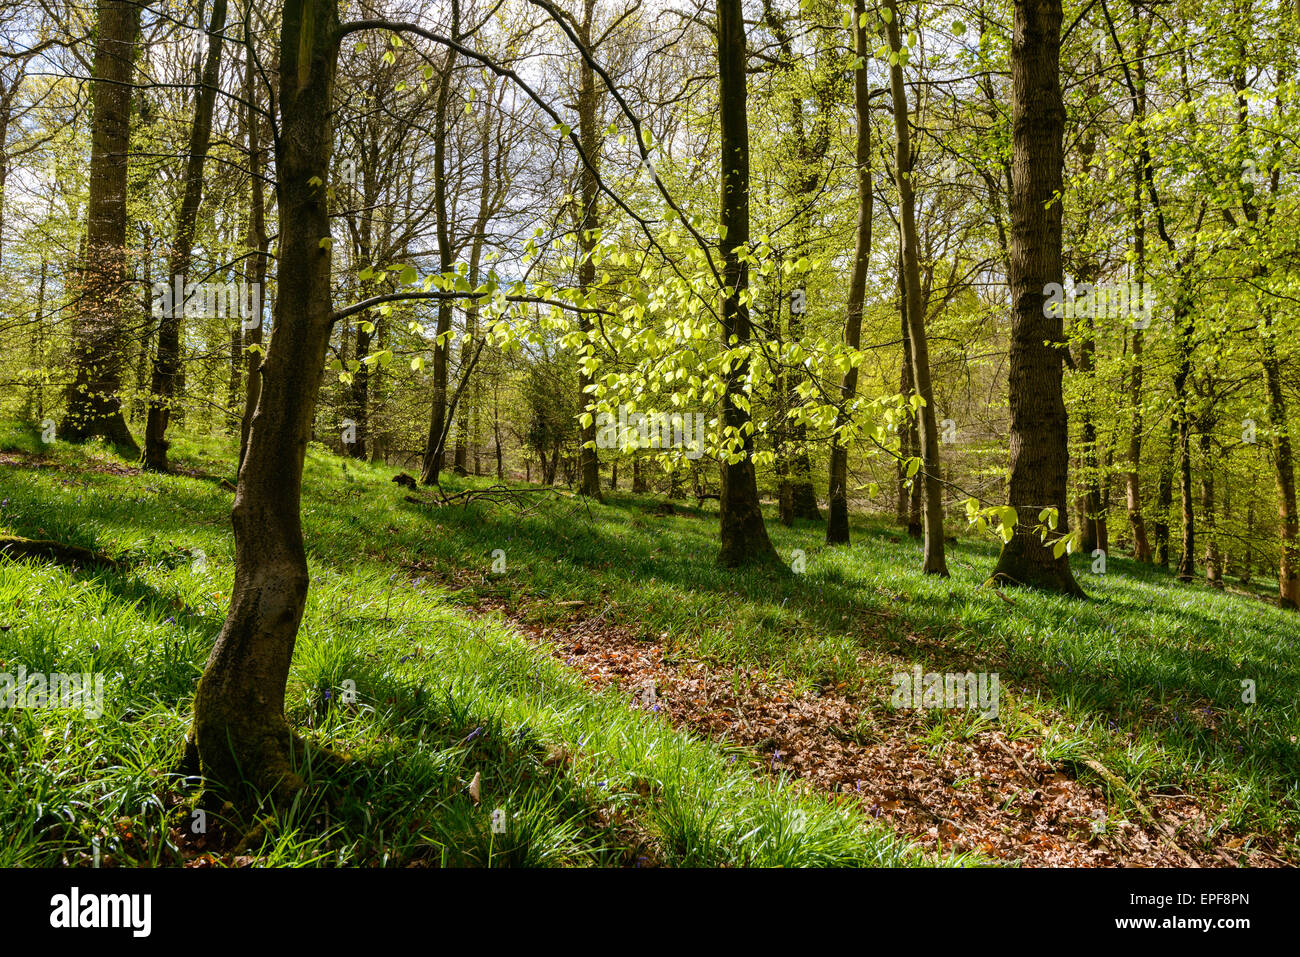 Springtime in the Forest of Dean with new leaves on trees and path through forest. Stock Photo